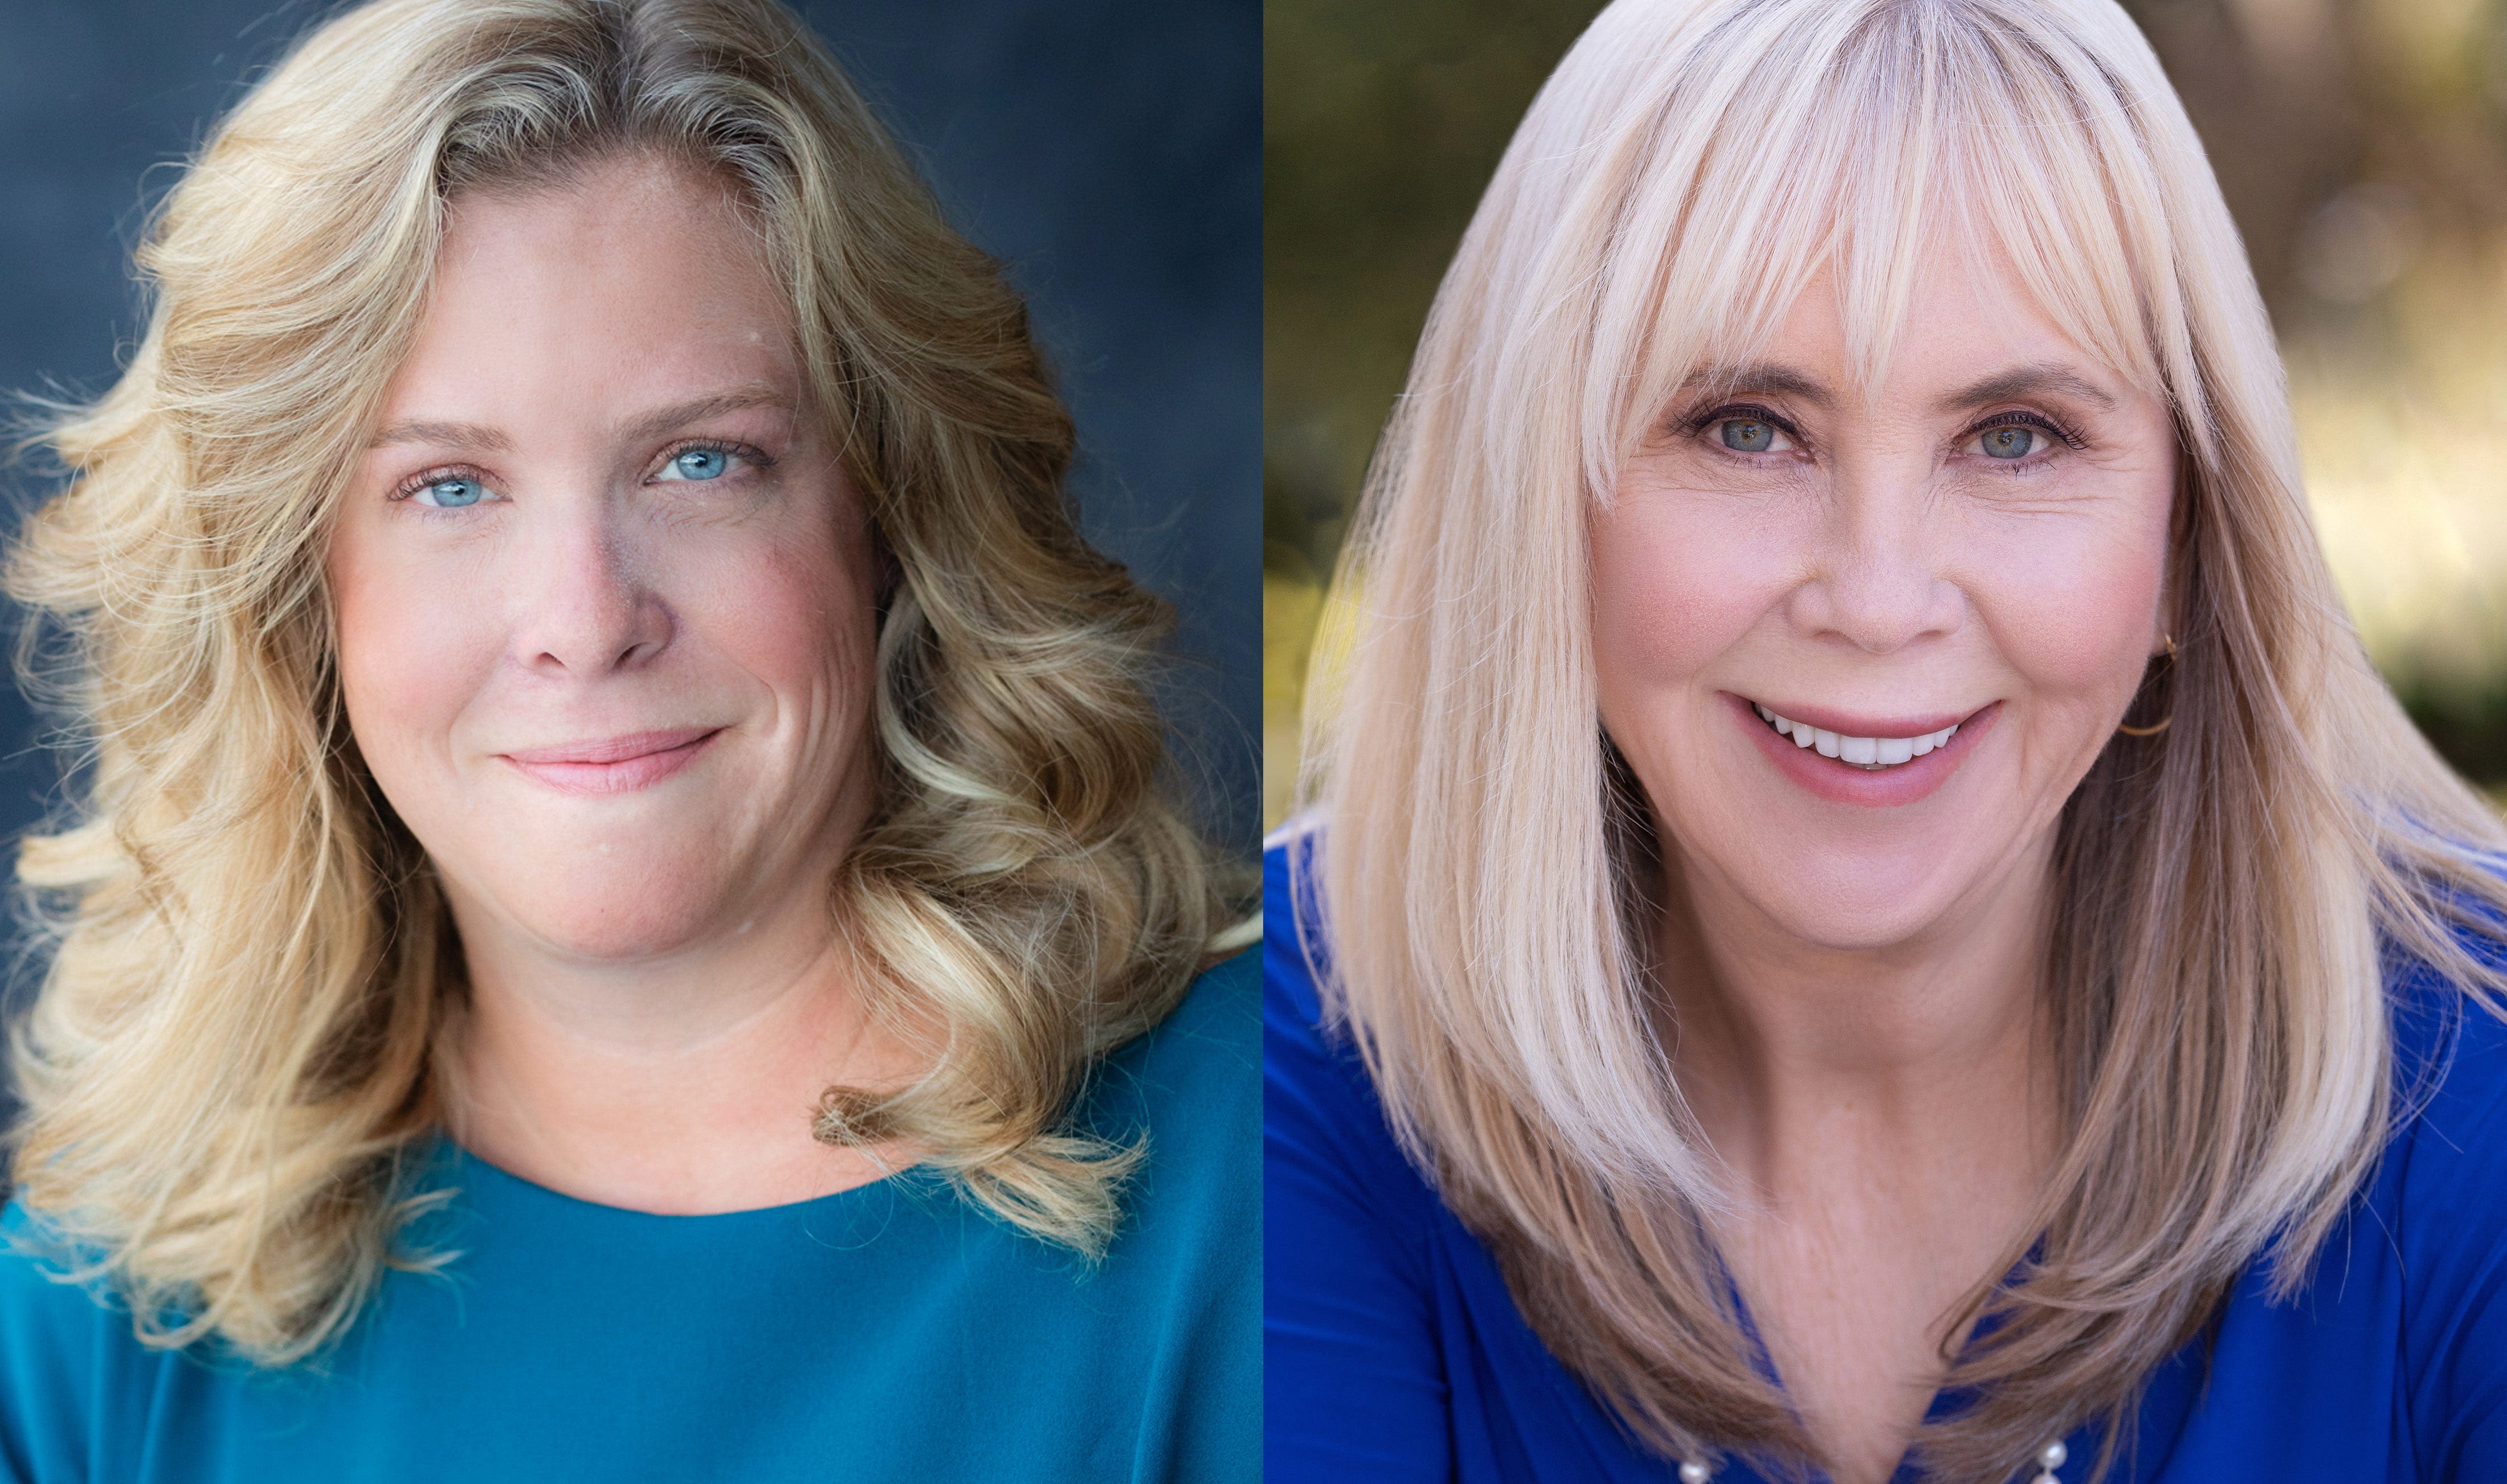 Karen Rose, Liz Barker are vying for a Sarasota School Board seat. Here's the clear choice.